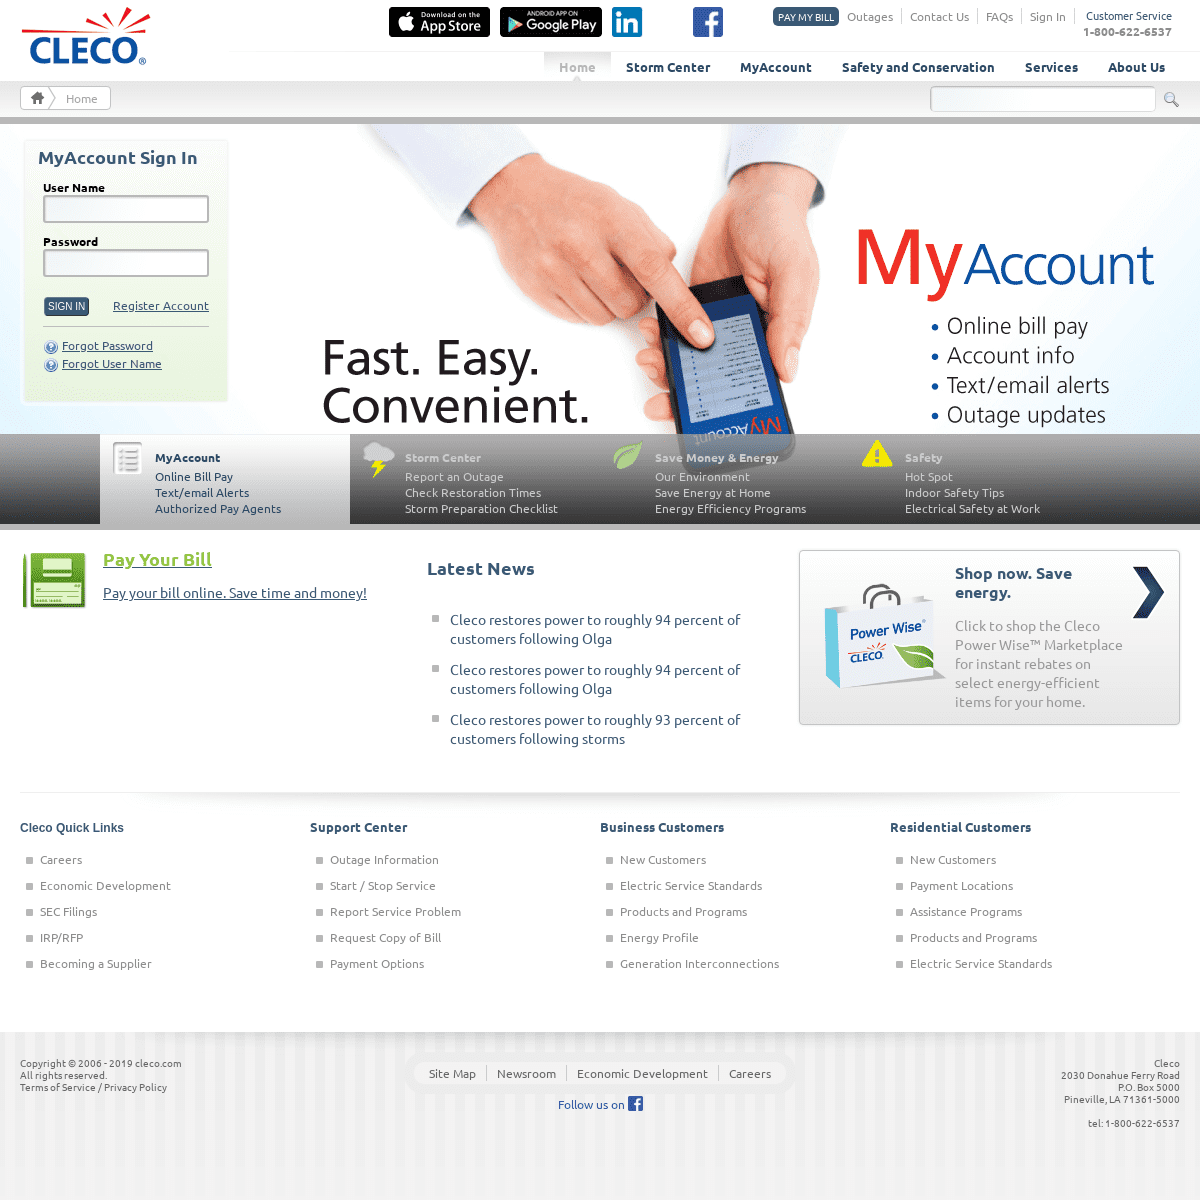 A complete backup of cleco.com